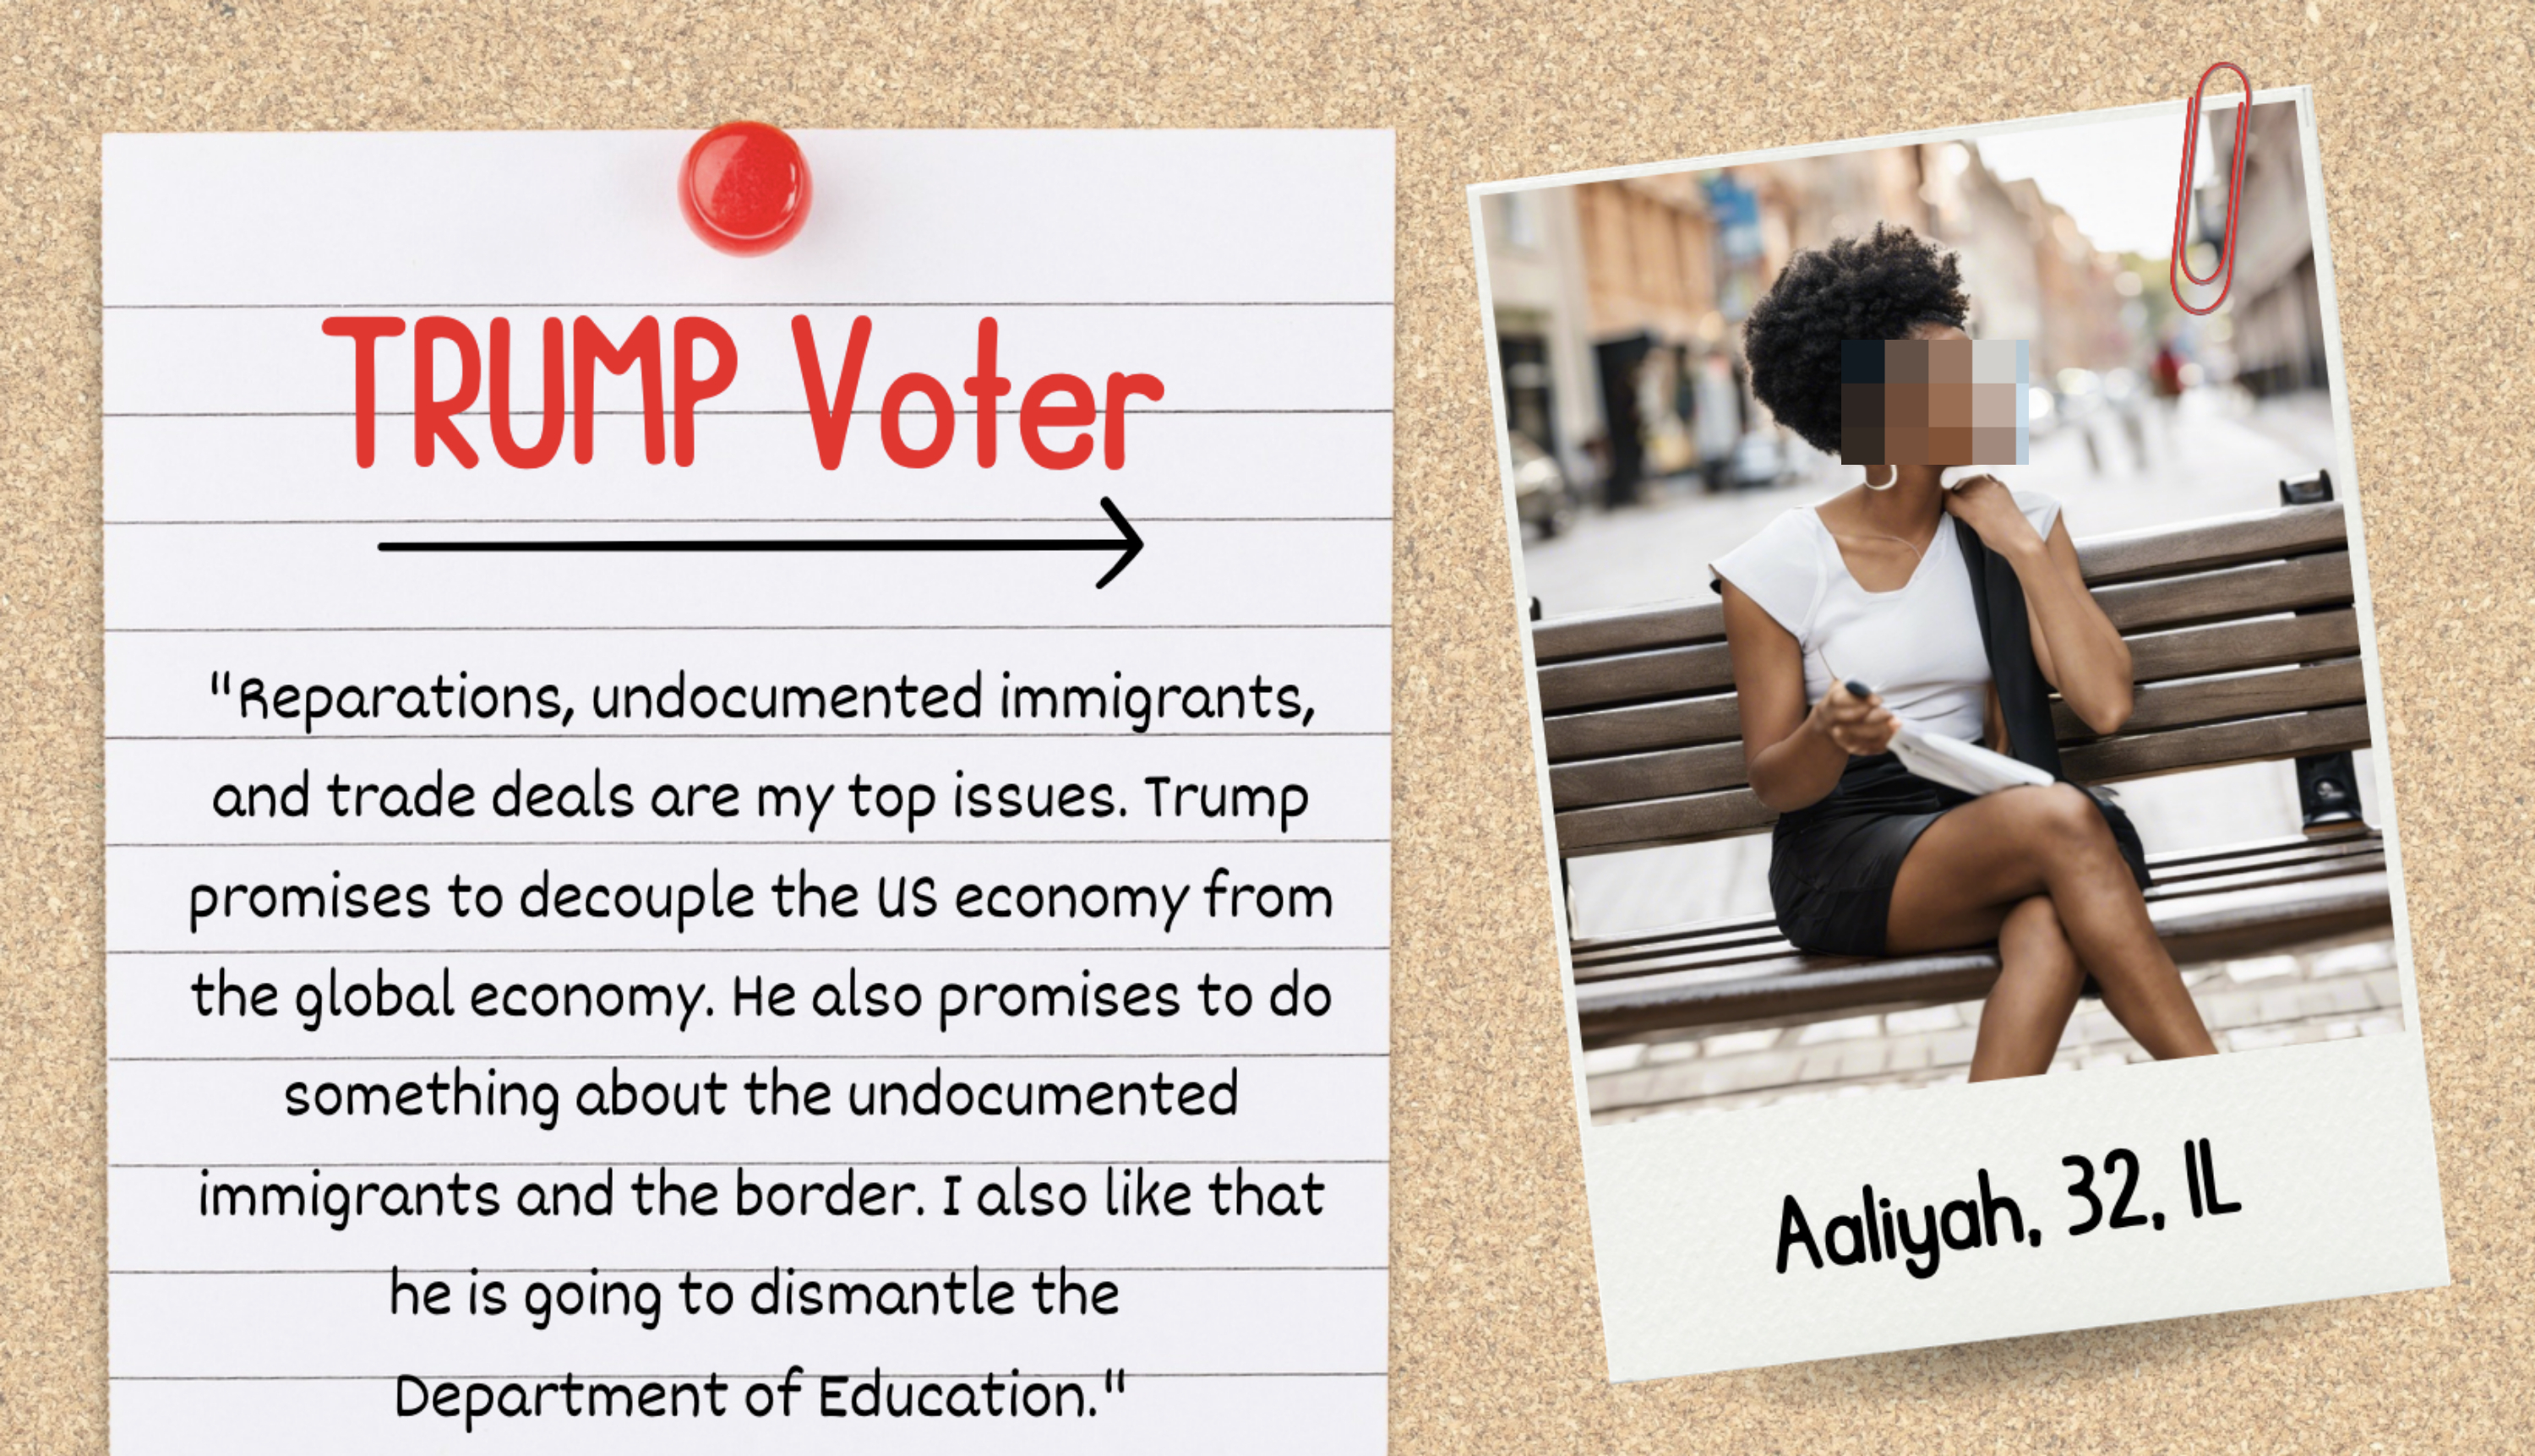 Note pinned on a board states reasons for voting Trump, mentioning immigration and education stances. Aaliyah, 32, IL, sits thoughtfully on a bench in a photo